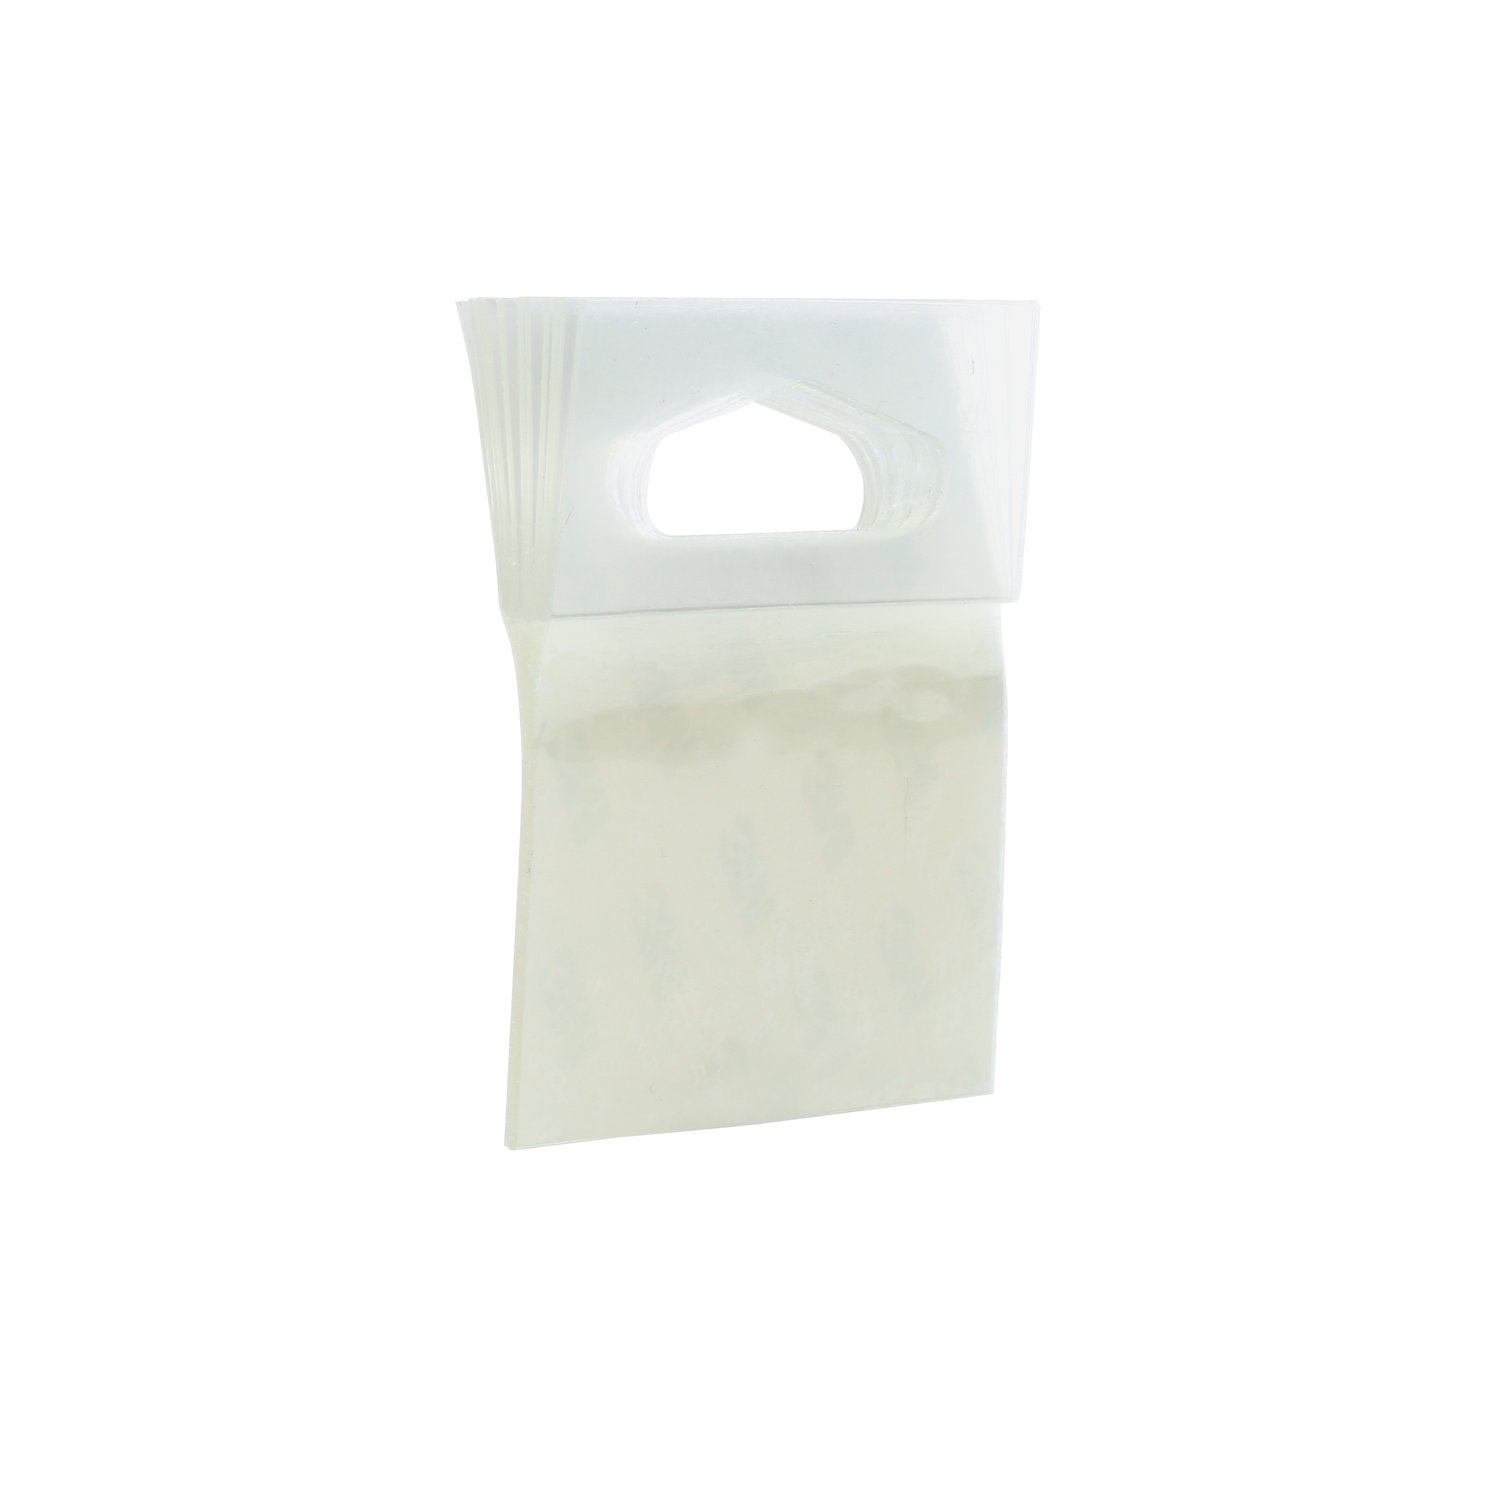 7010300523 - 3M Hang Tab 1075, Clear, 2 in x 2 in, 5 Pack/Case, Conveniently
Packaged